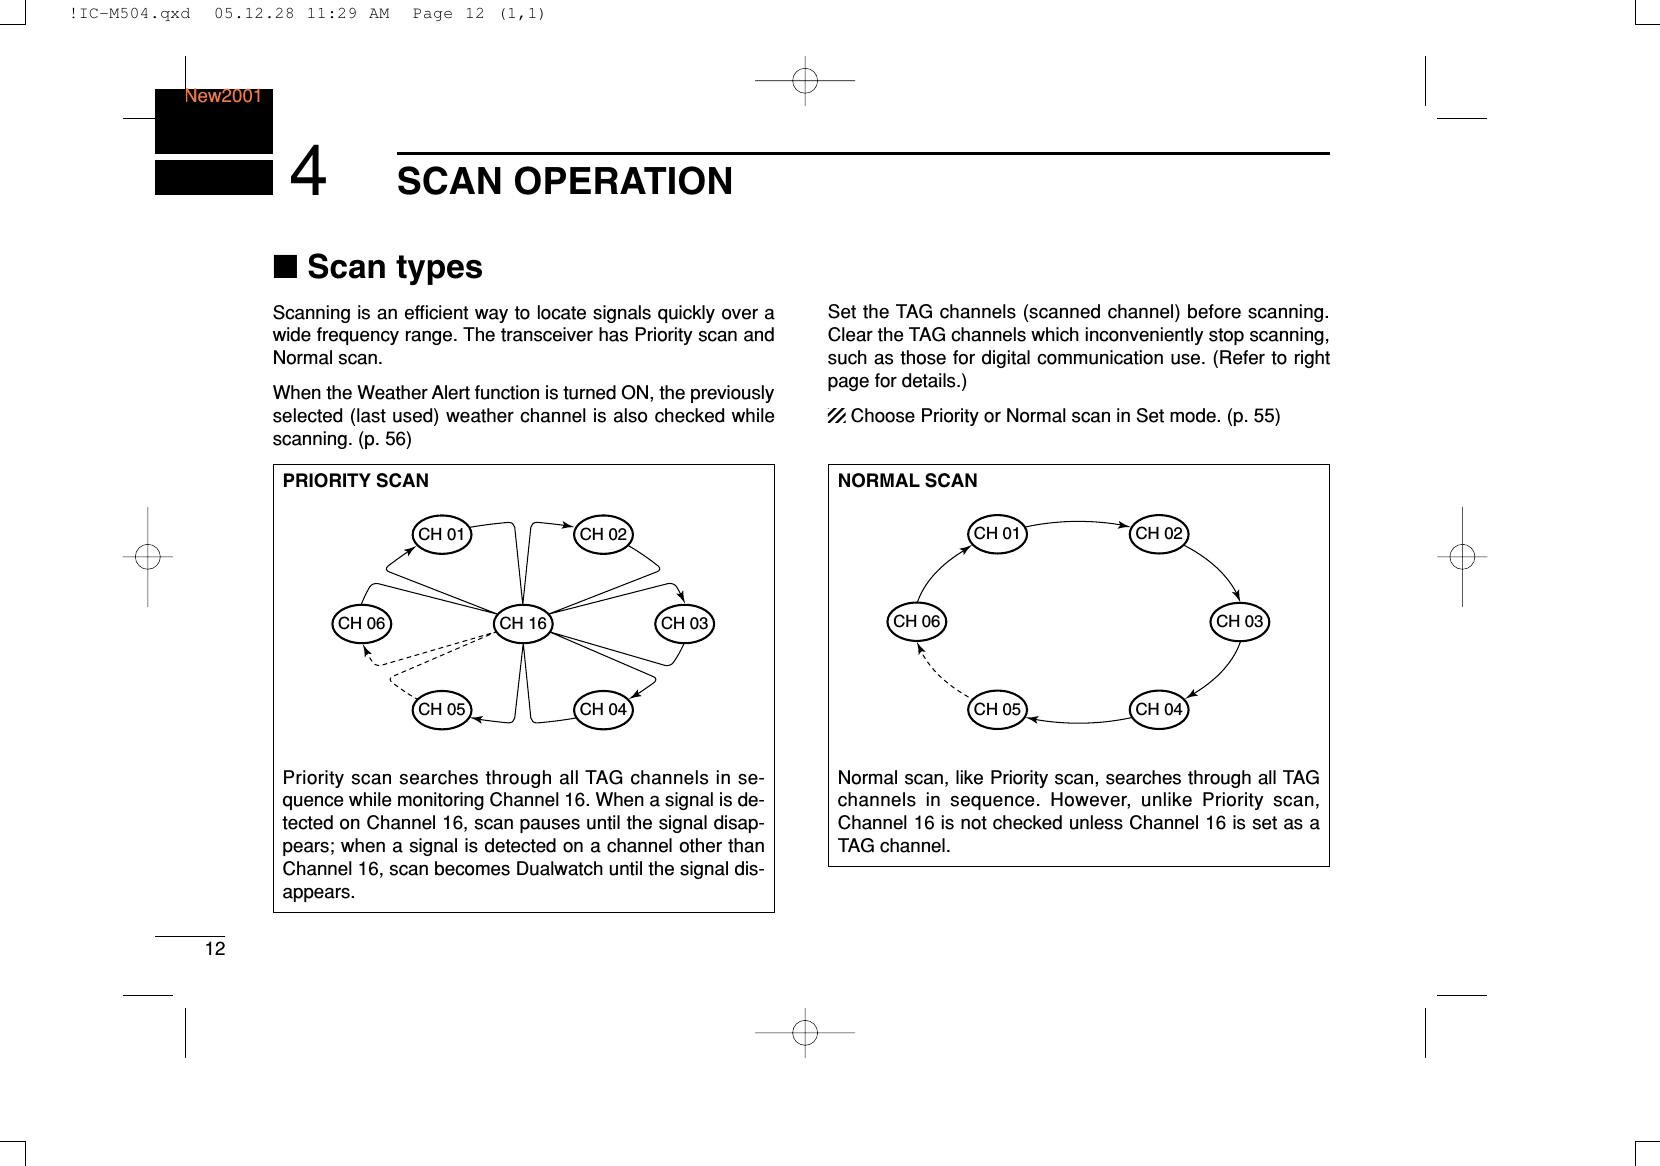 12SCAN OPERATIONNew20014■Scan typesScanning is an efﬁcient way to locate signals quickly over awide frequency range. The transceiver has Priority scan andNormal scan.When the Weather Alert function is turned ON, the previouslyselected (last used) weather channel is also checked whilescanning. (p. 56)Set the TAG channels (scanned channel) before scanning.Clear the TAG channels which inconveniently stop scanning,such as those for digital communication use. (Refer to rightpage for details.)Choose Priority or Normal scan in Set mode. (p. 55)PRIORITY SCANPriority scan searches through all TAG channels in se-quence while monitoring Channel 16. When a signal is de-tected on Channel 16, scan pauses until the signal disap-pears; when a signal is detected on a channel other thanChannel 16, scan becomes Dualwatch until the signal dis-appears.CH 06CH 01CH 16CH 02CH 05 CH 04CH 03NORMAL SCANNormal scan, like Priority scan, searches through all TAGchannels in sequence. However, unlike Priority scan,Channel 16 is not checked unless Channel 16 is set as aTAG channel.CH 01 CH 02CH 06CH 05 CH 04CH 03!IC-M504.qxd  05.12.28 11:29 AM  Page 12 (1,1)